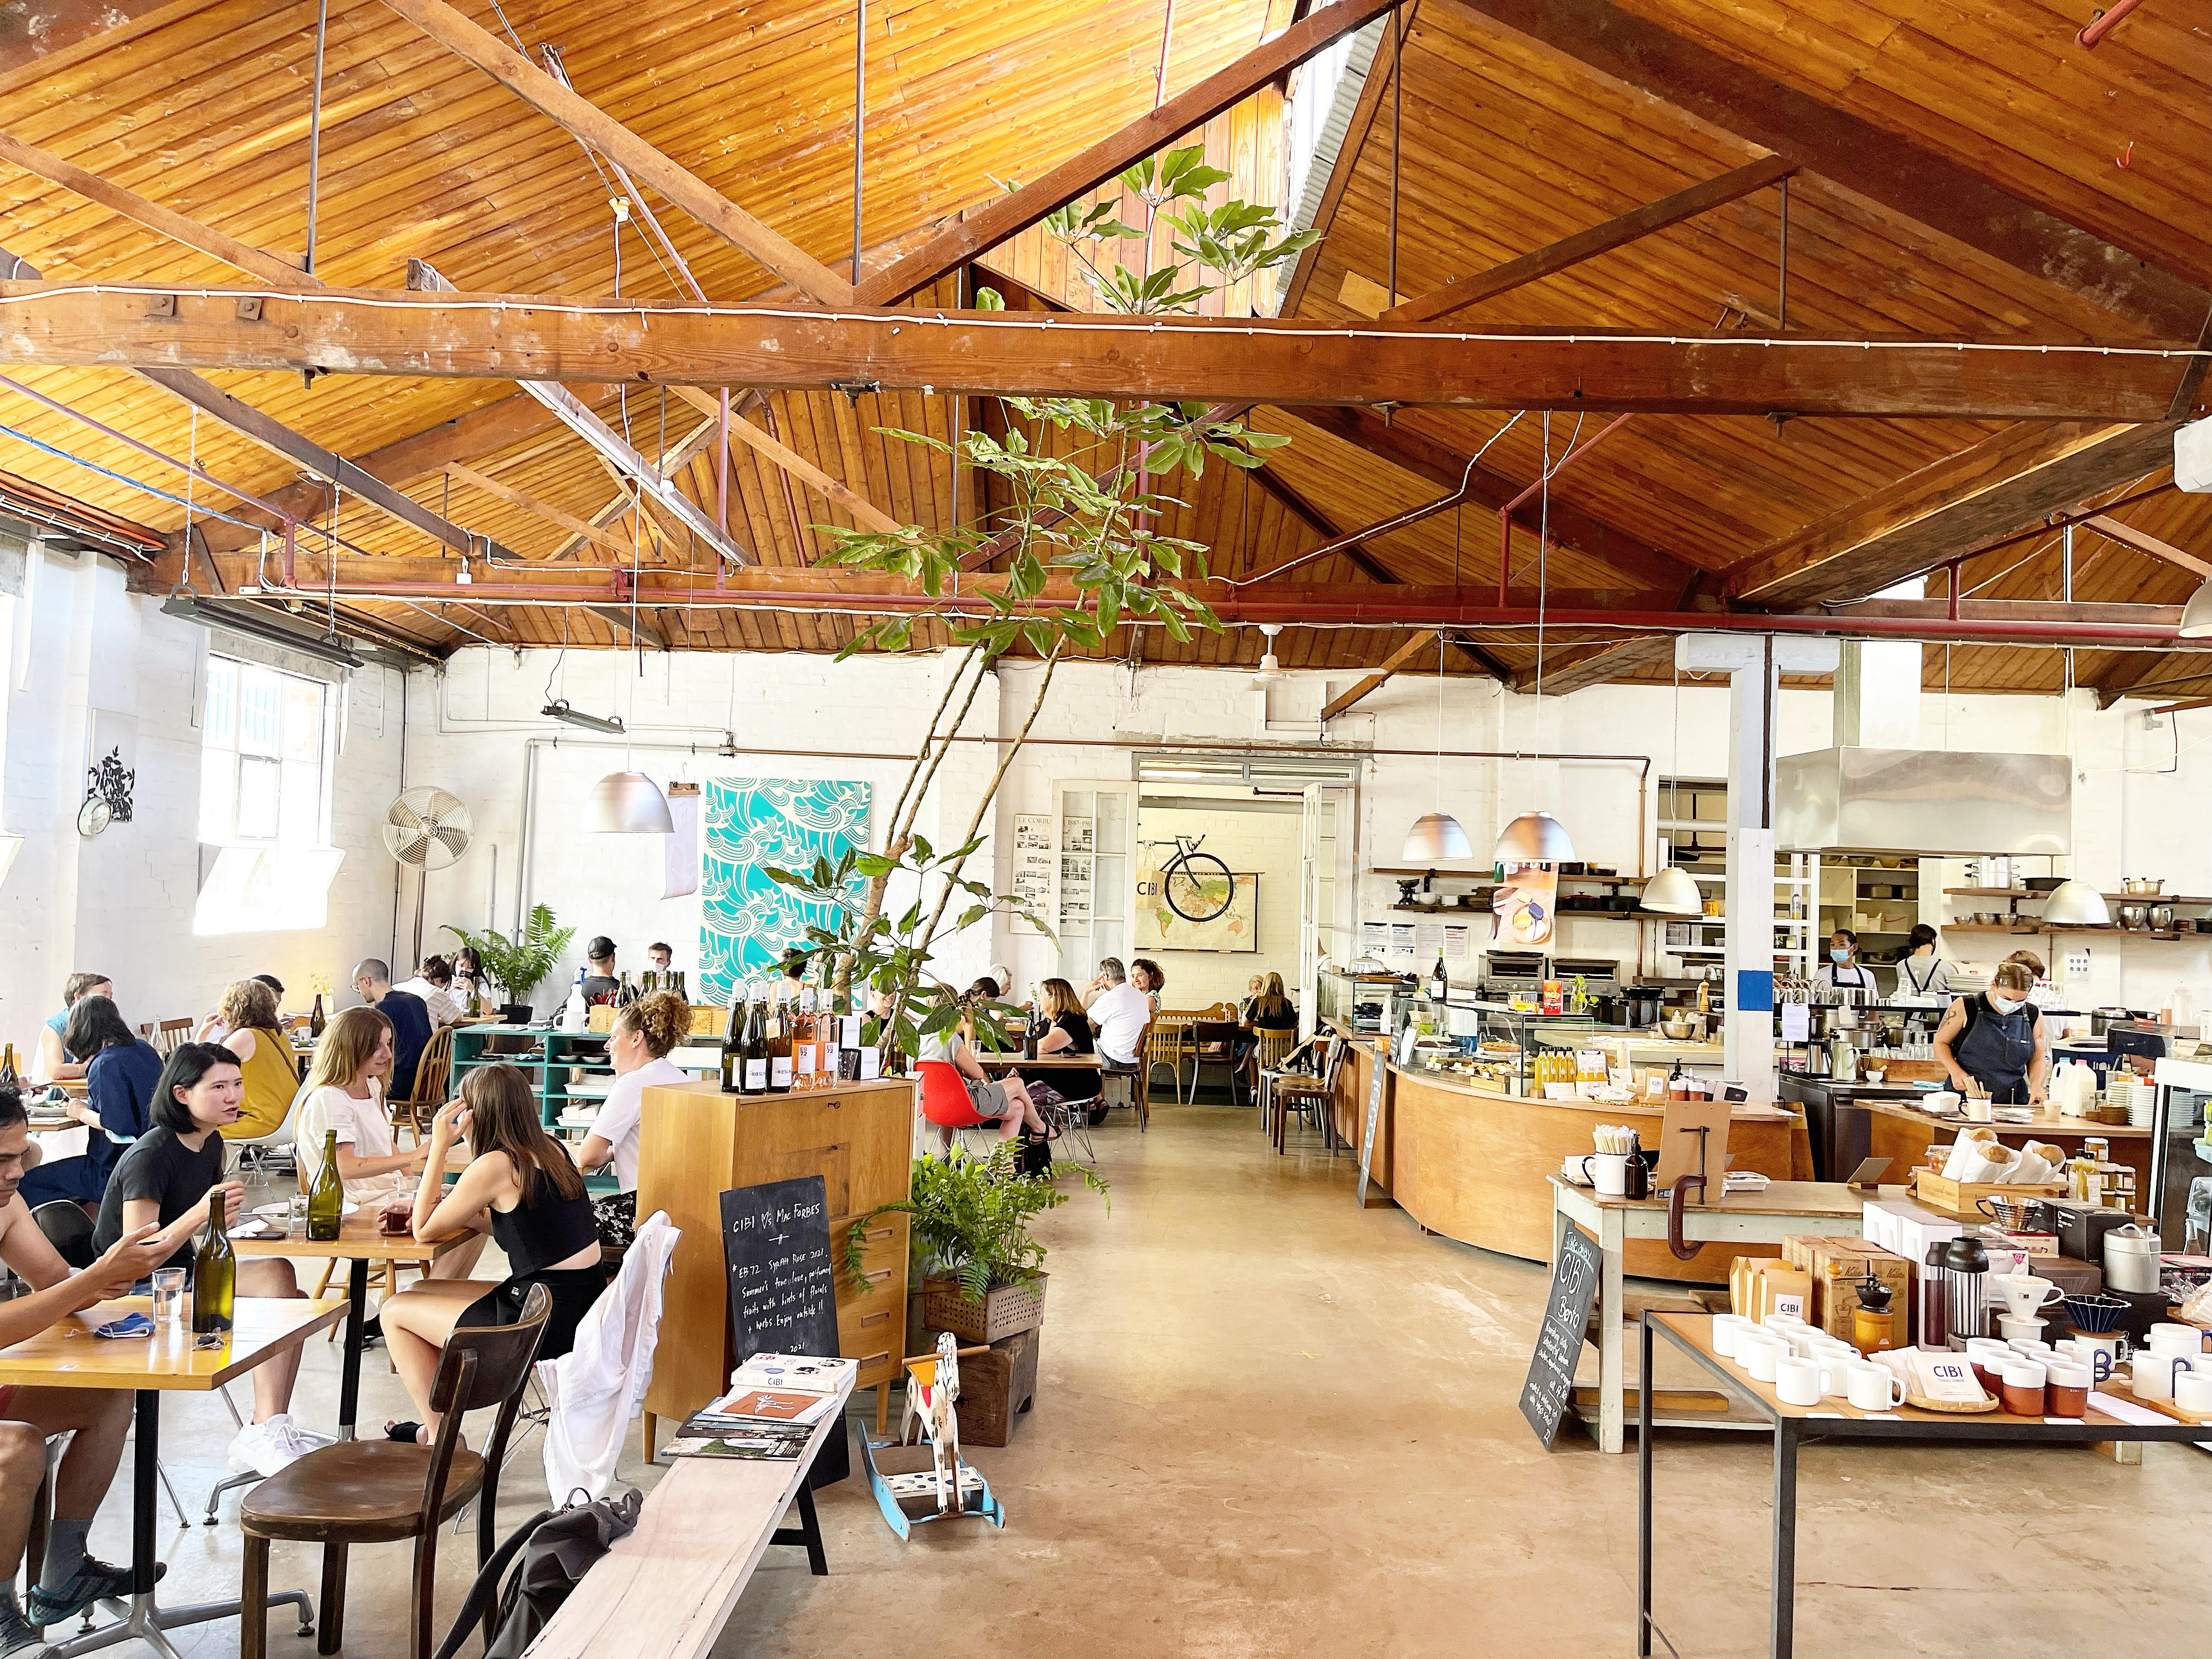 A tall airy cafe, where diners sit at tables, large plants hover, and items for sale are on display.